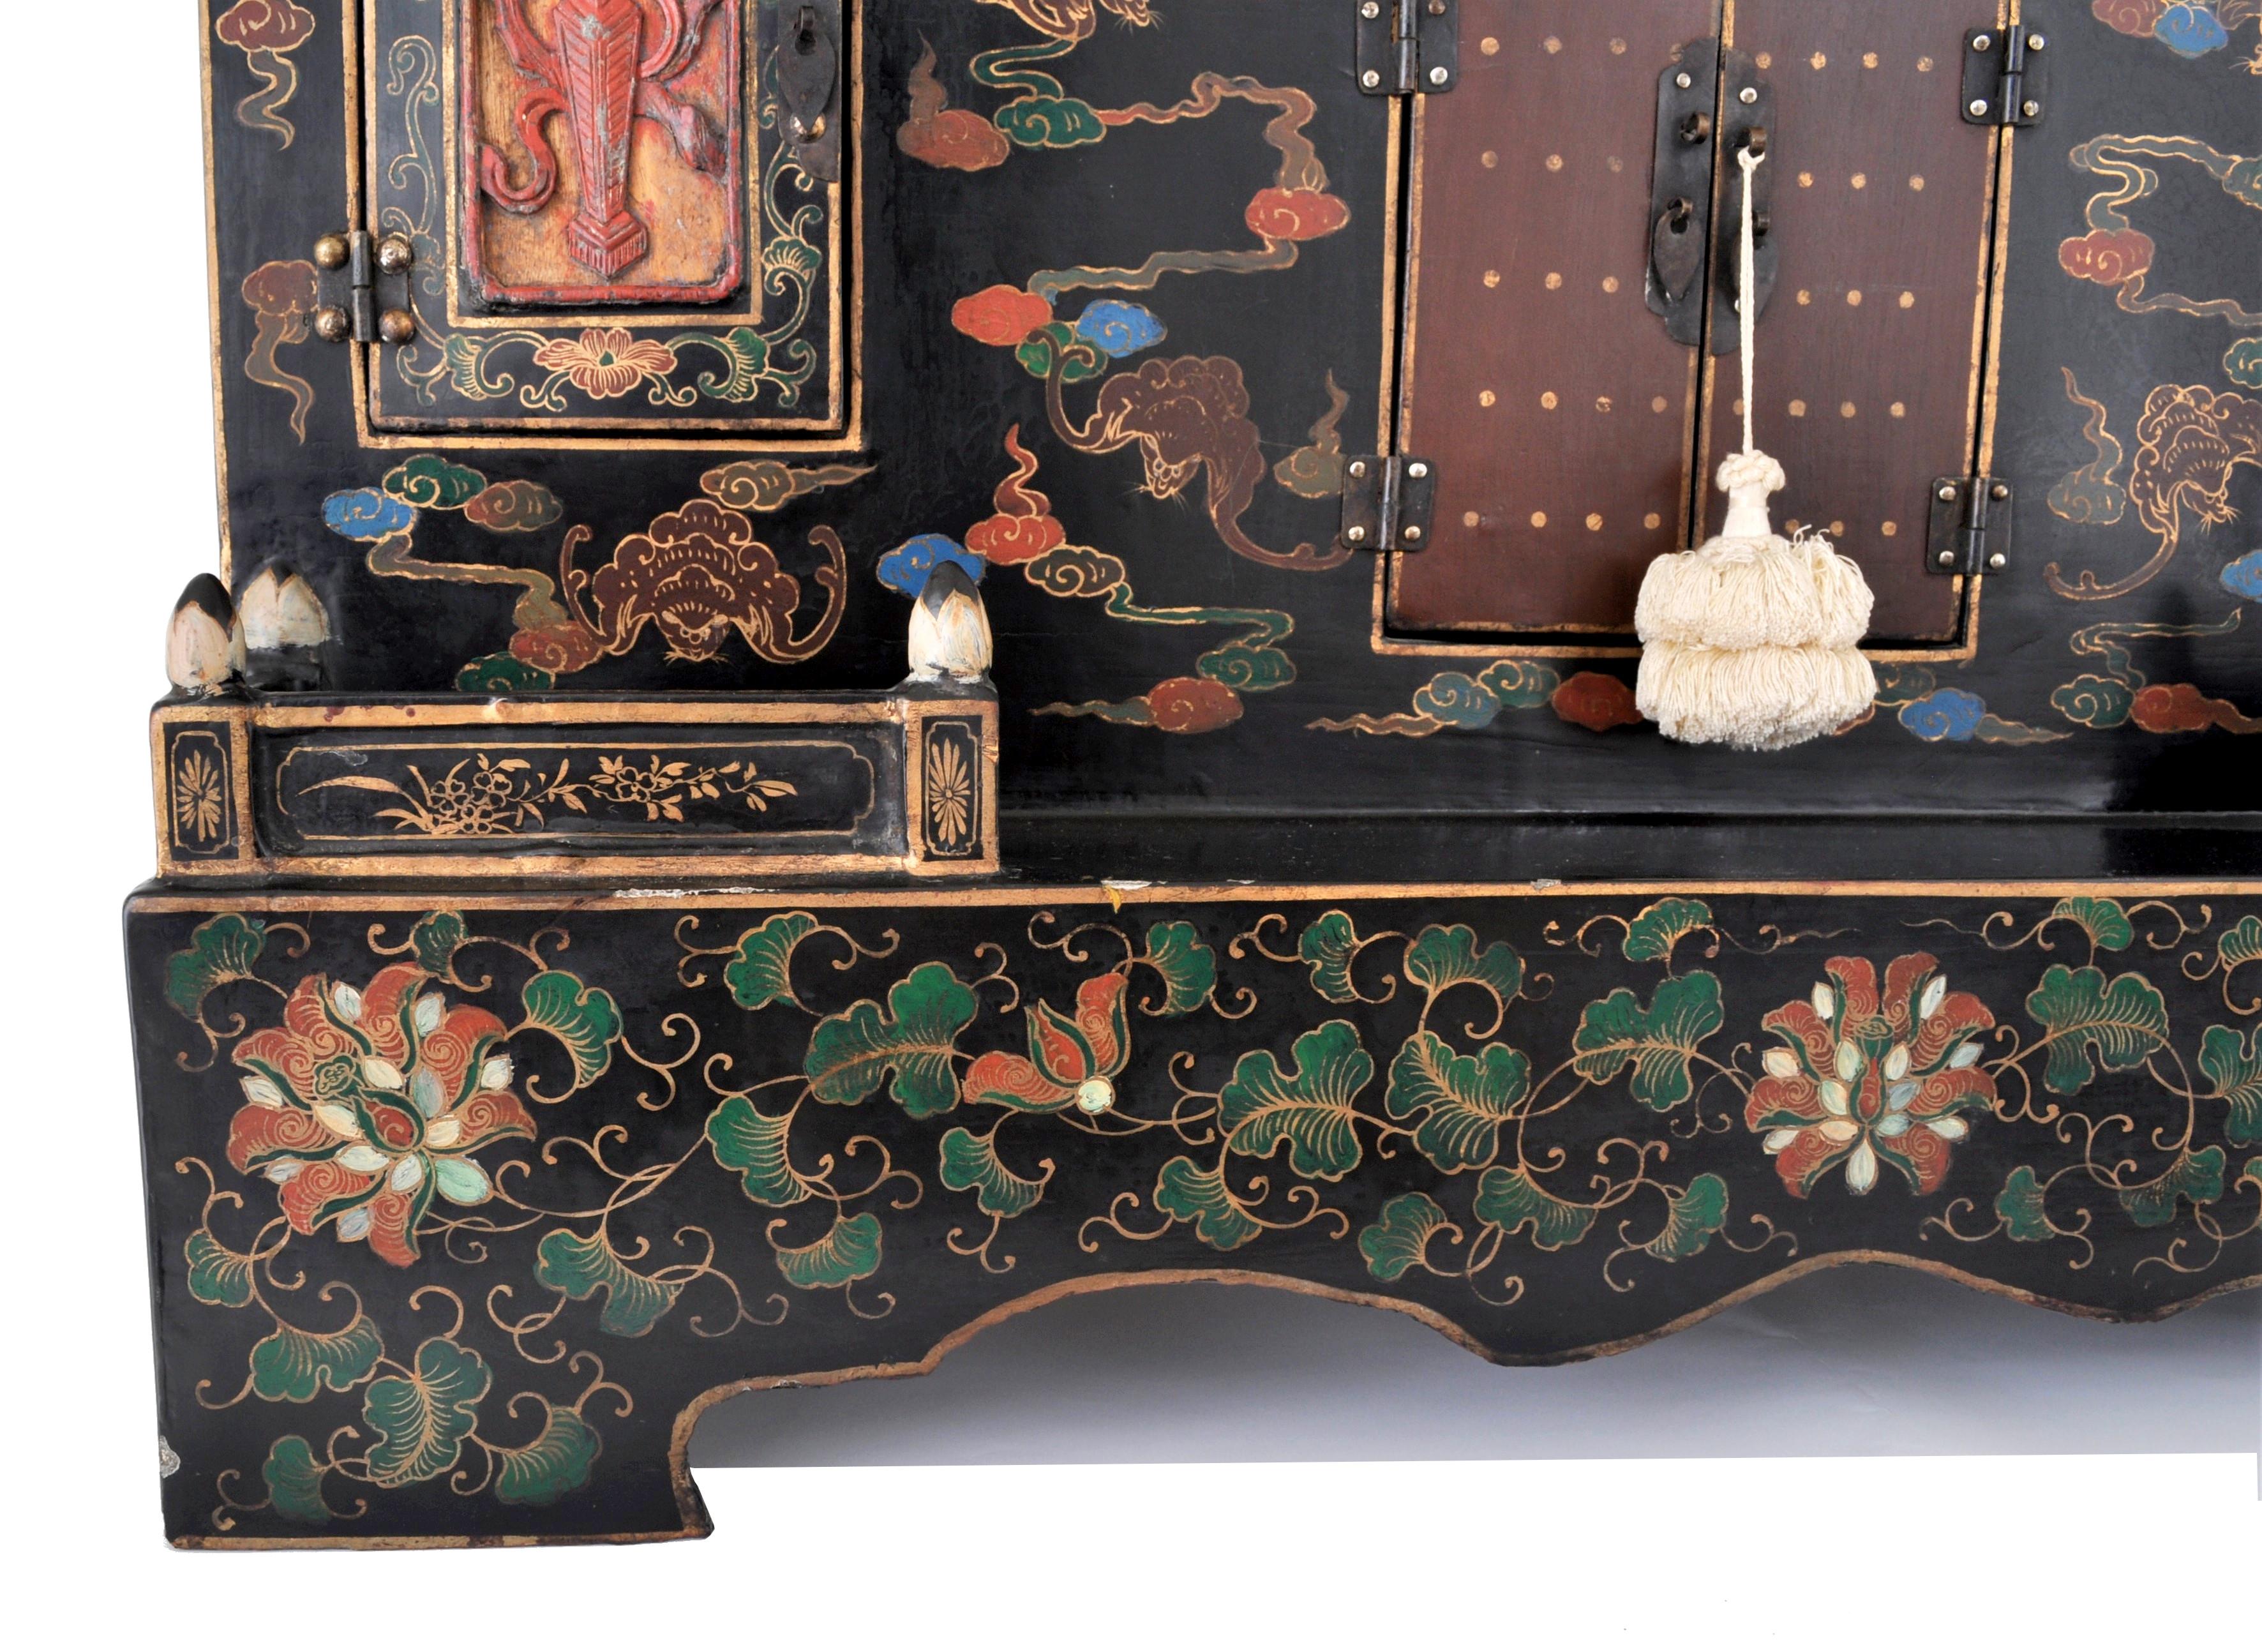 Antique Chinese Qing Dynasty Lacquer Cloisonne Buddhistic Shrine/Cabinet 6